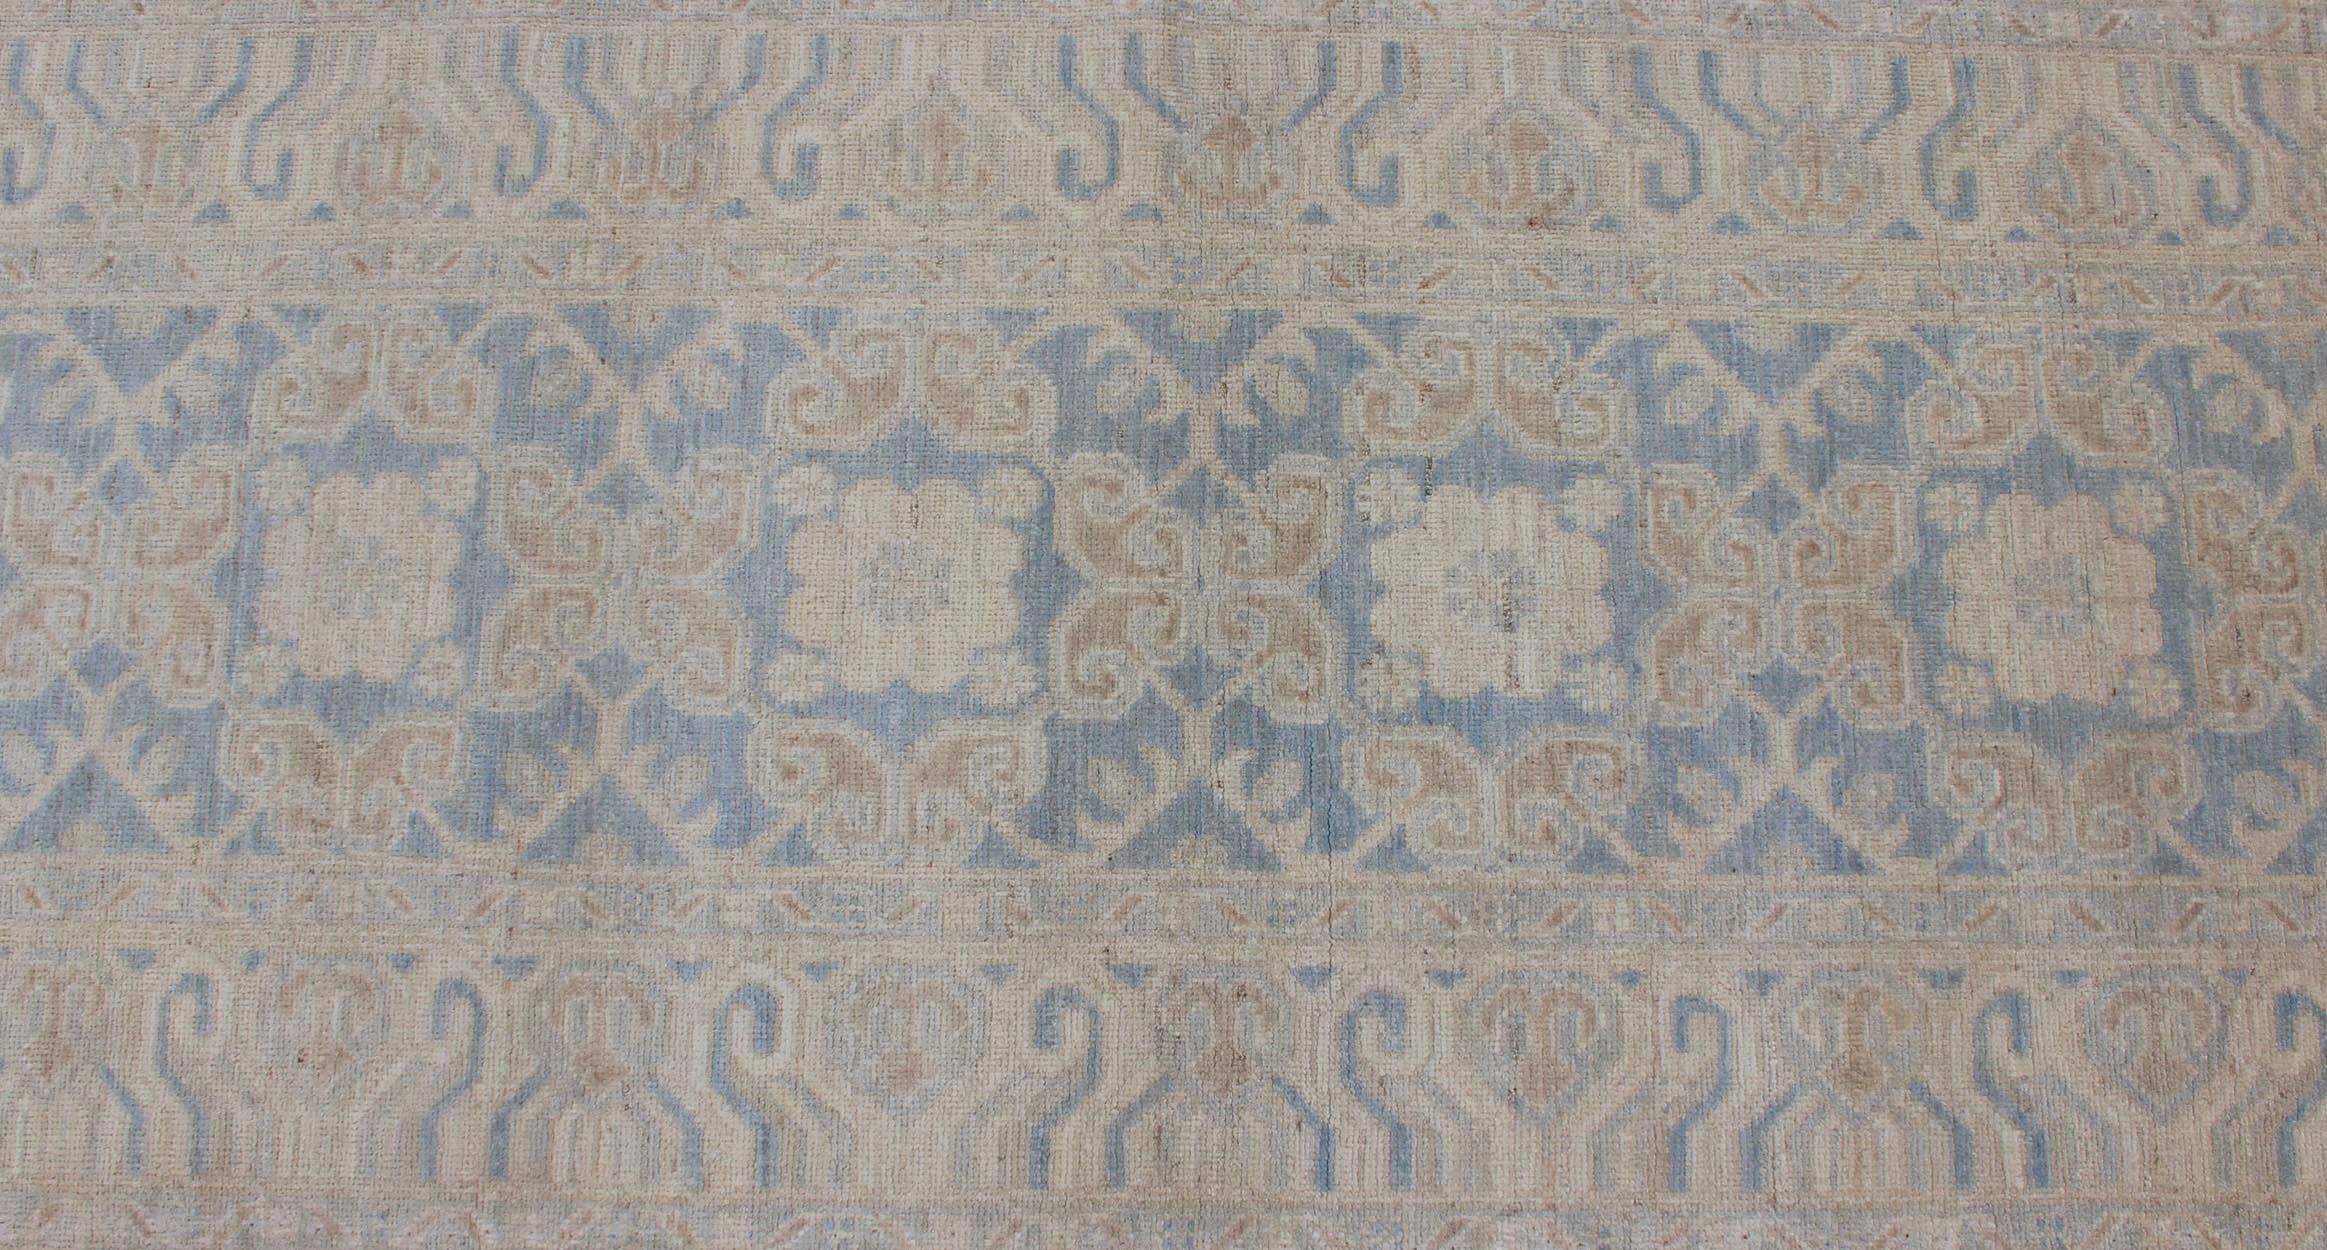 Afghan Khotan Runner with Geometric Design in Shades of Powder Blue and Tan For Sale 4